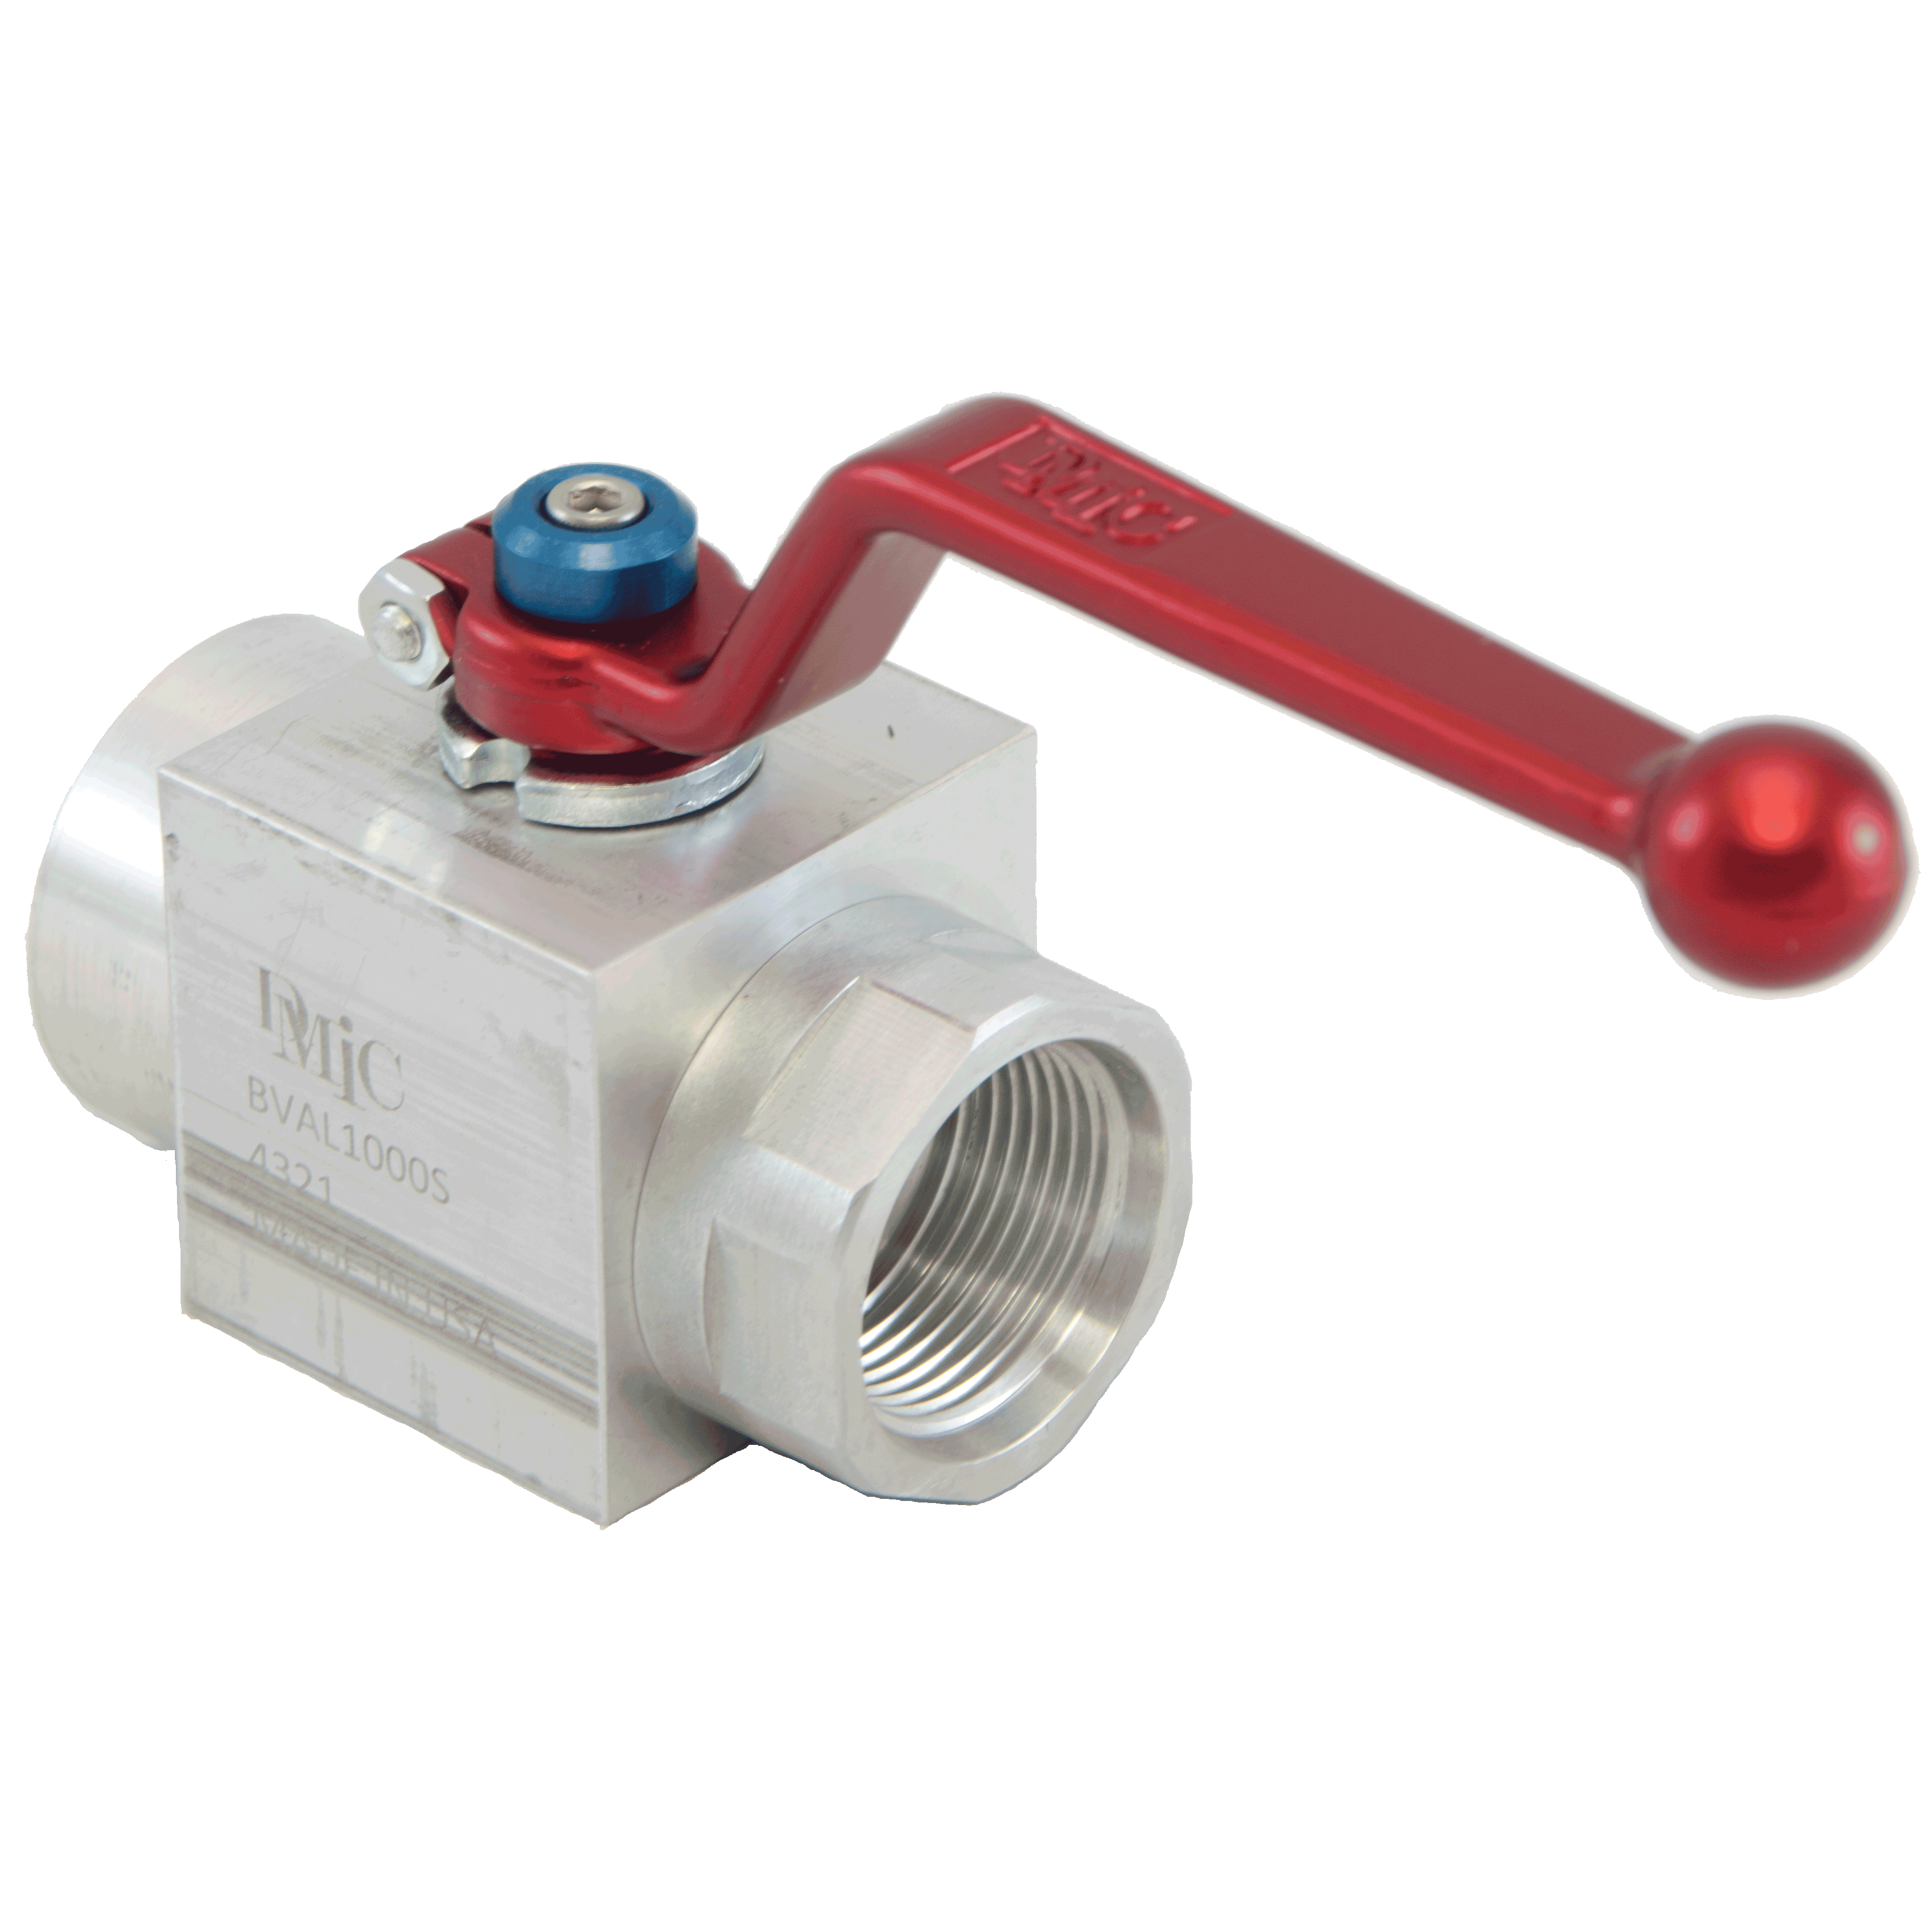 BVAL-2500N-4321 : DMIC Suction Ball Valve, 2.5 NPT, Aluminum, 400psi, Two-Way